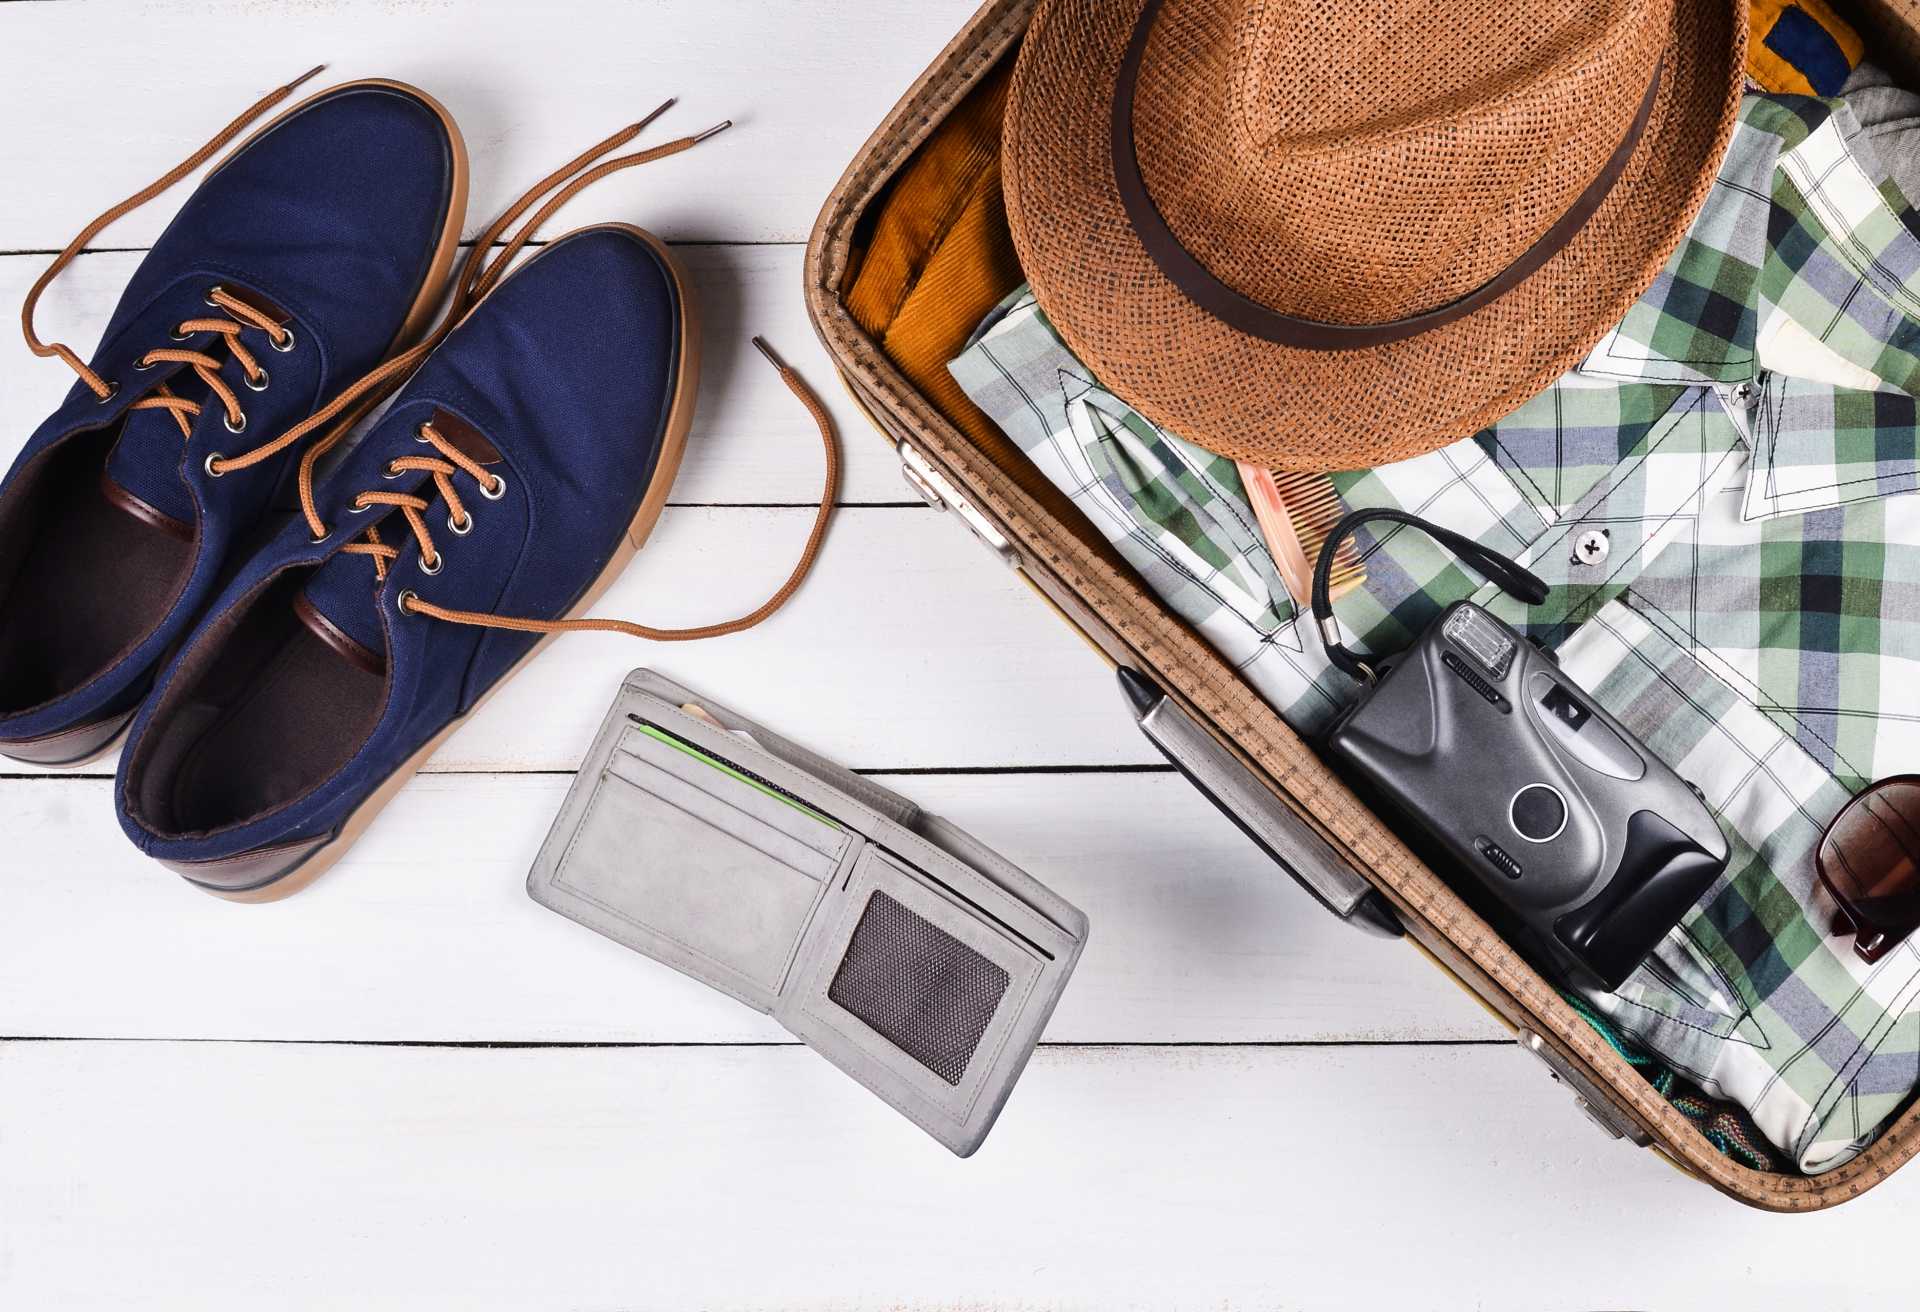 Open suitcase for travel with things and accessories